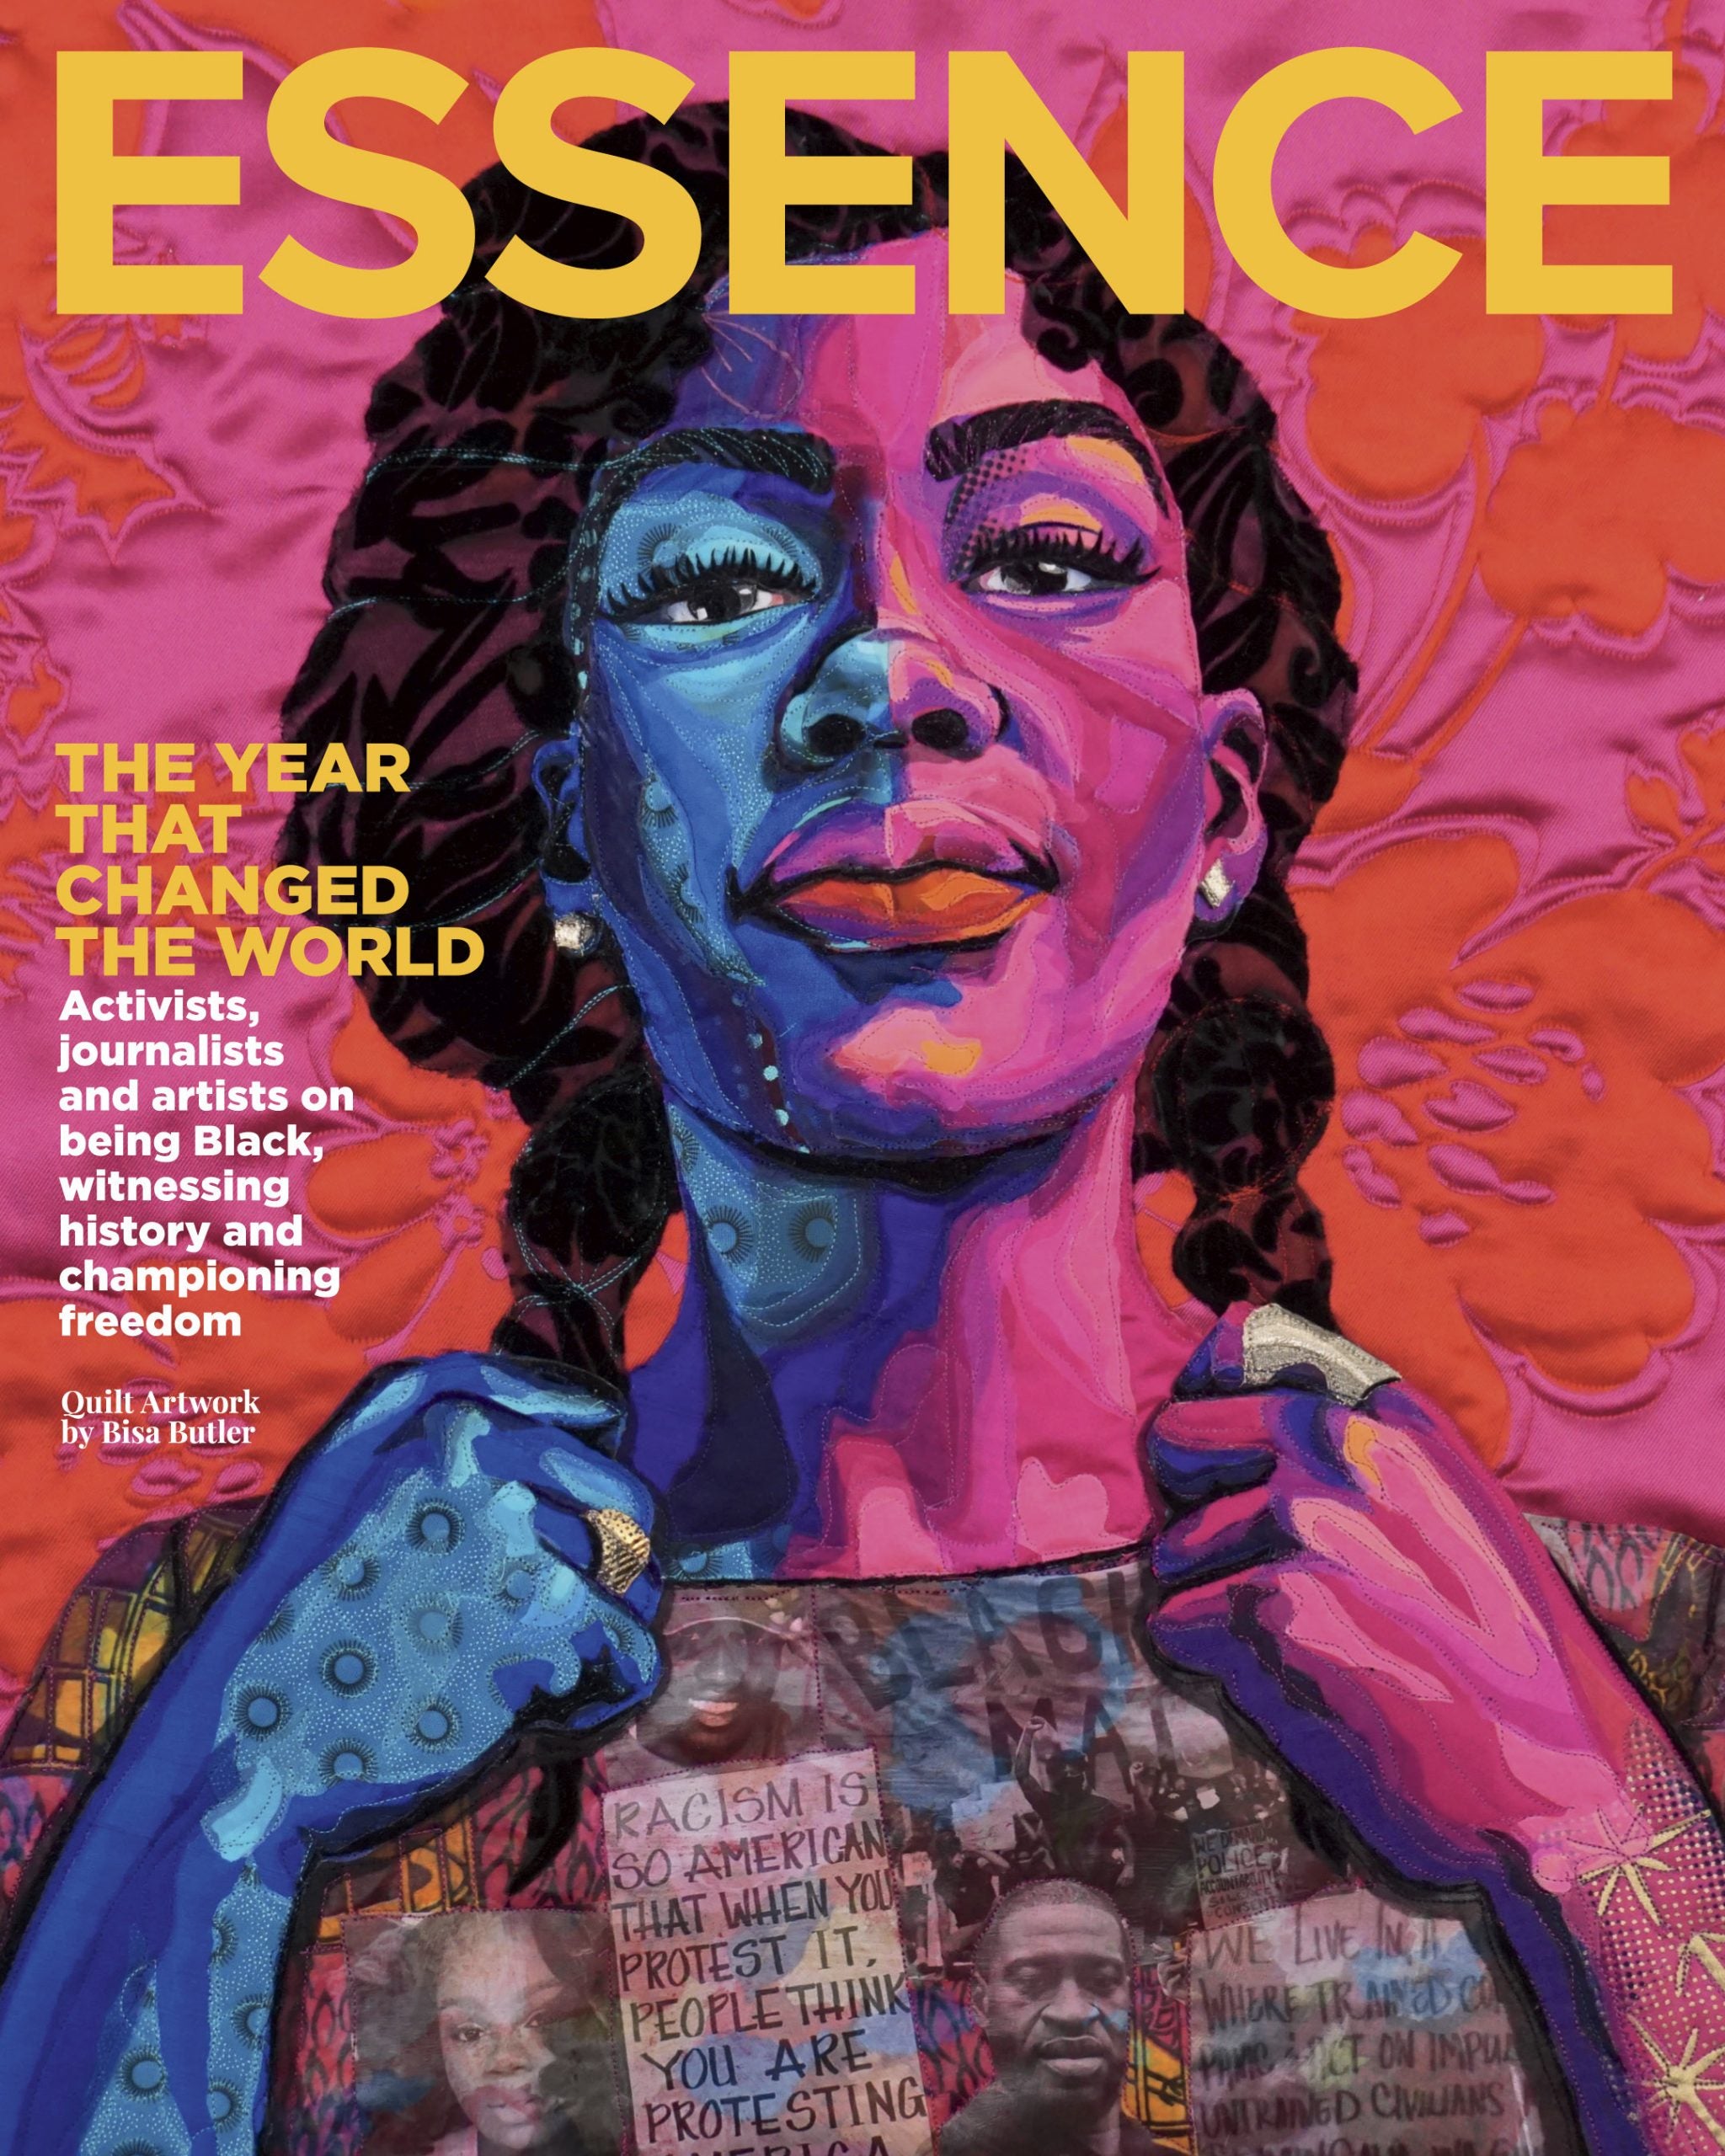 ESSENCE Unveils First-Ever Quilt Artwork Cover Marking ‘The Year That Changed The World’